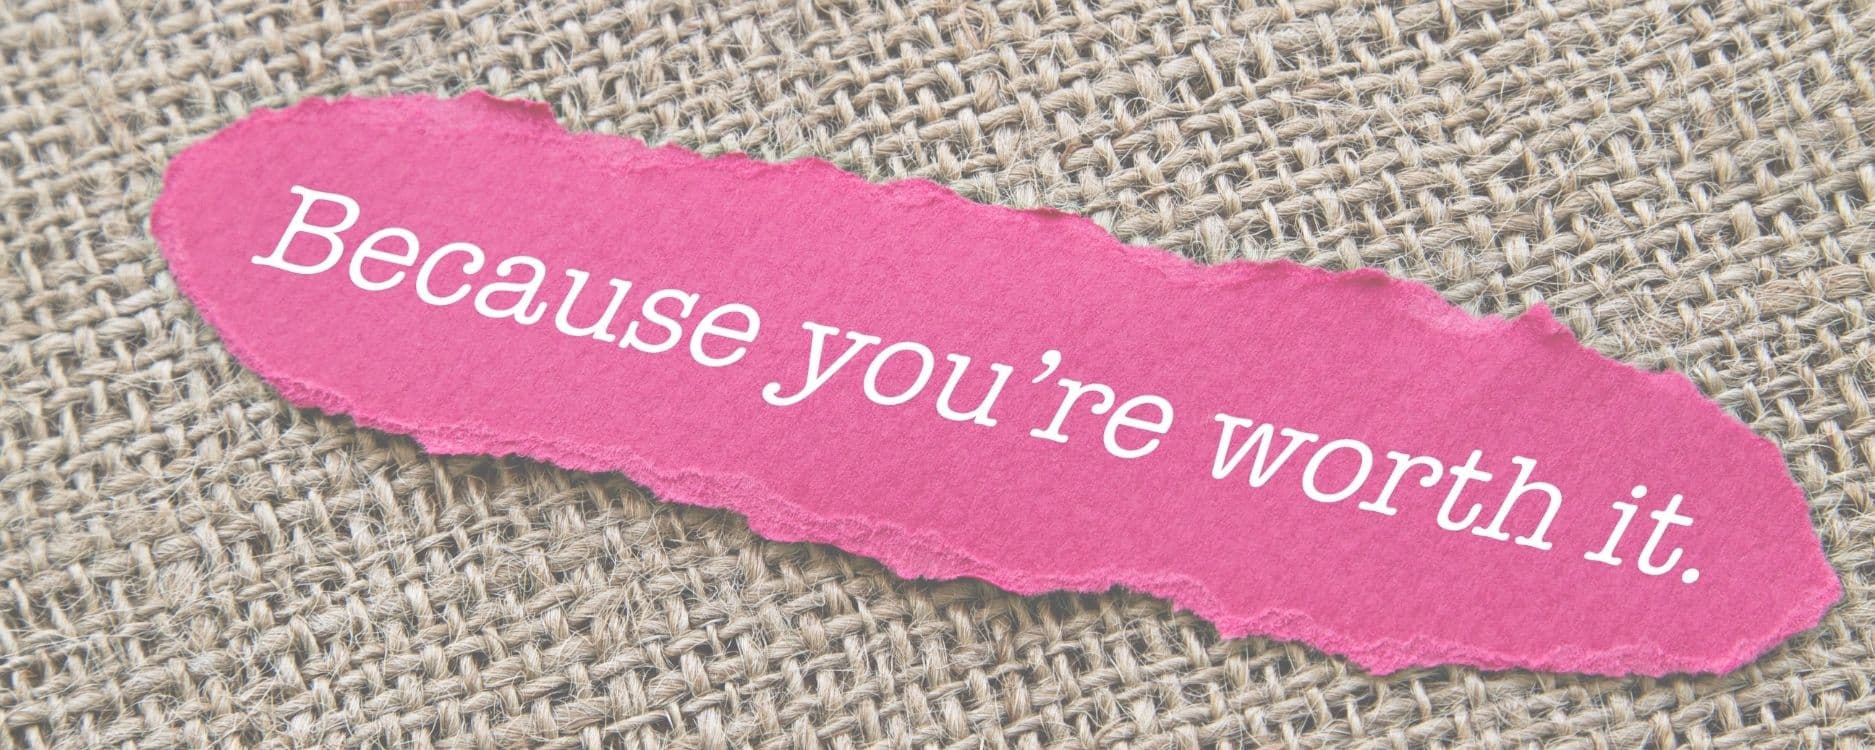 slip of paper that says "because you're worth it" for blog post How to handle the budget talk and get paid what you're worth.